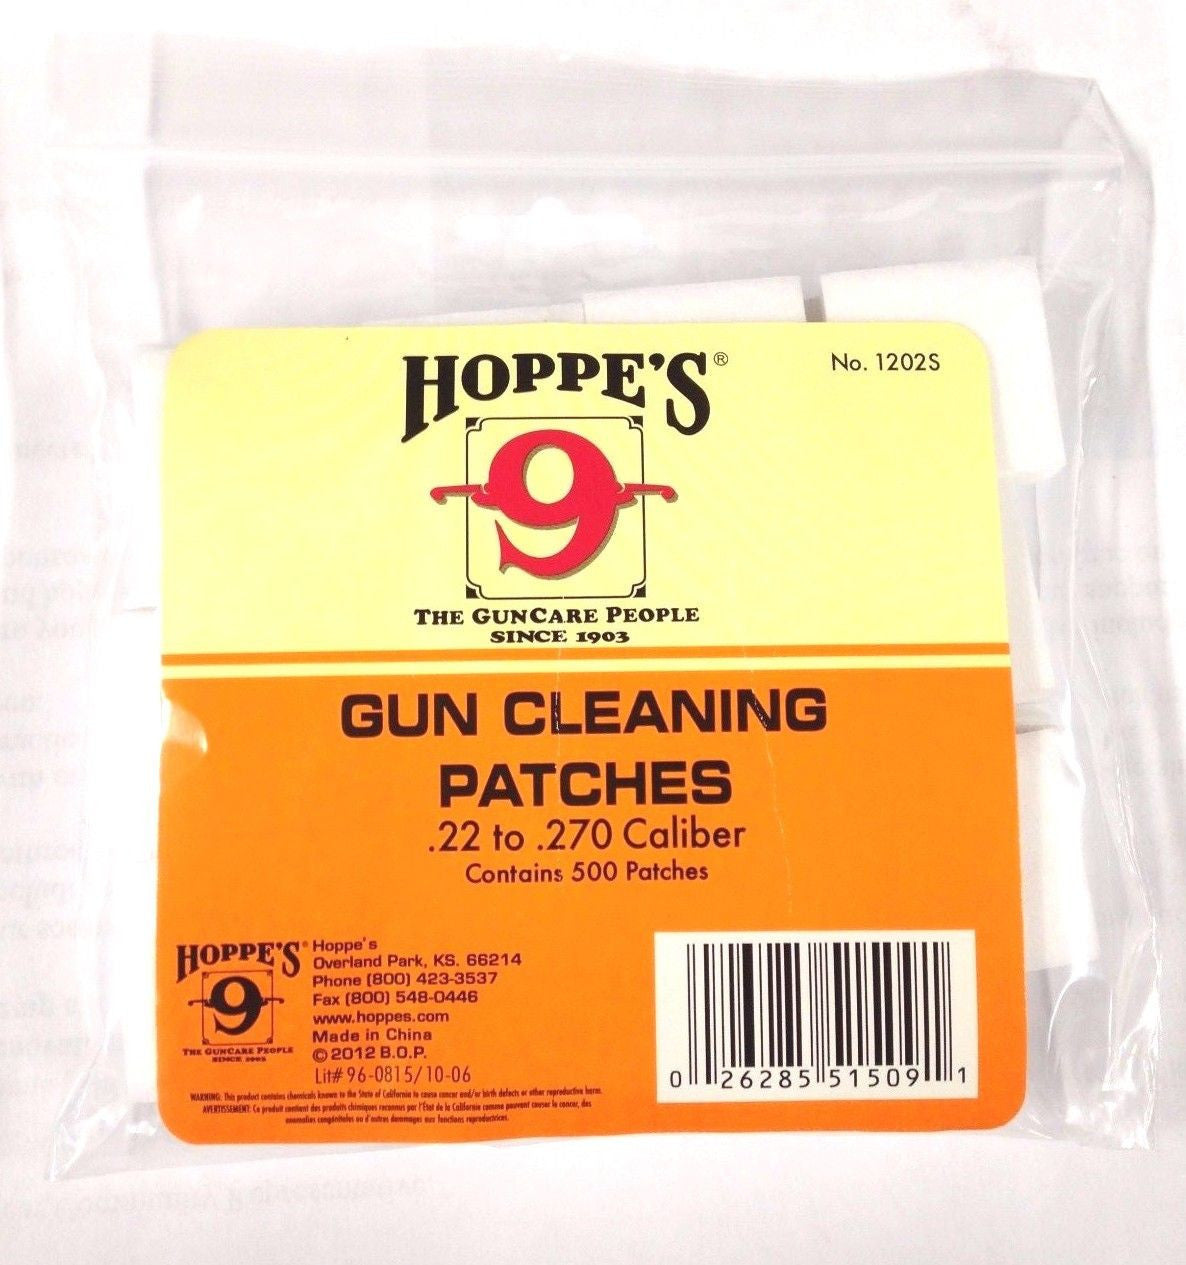 Hoppe's No. 9 Gun Cleaning Patches for .22-.270 Caliber (500 Pack)